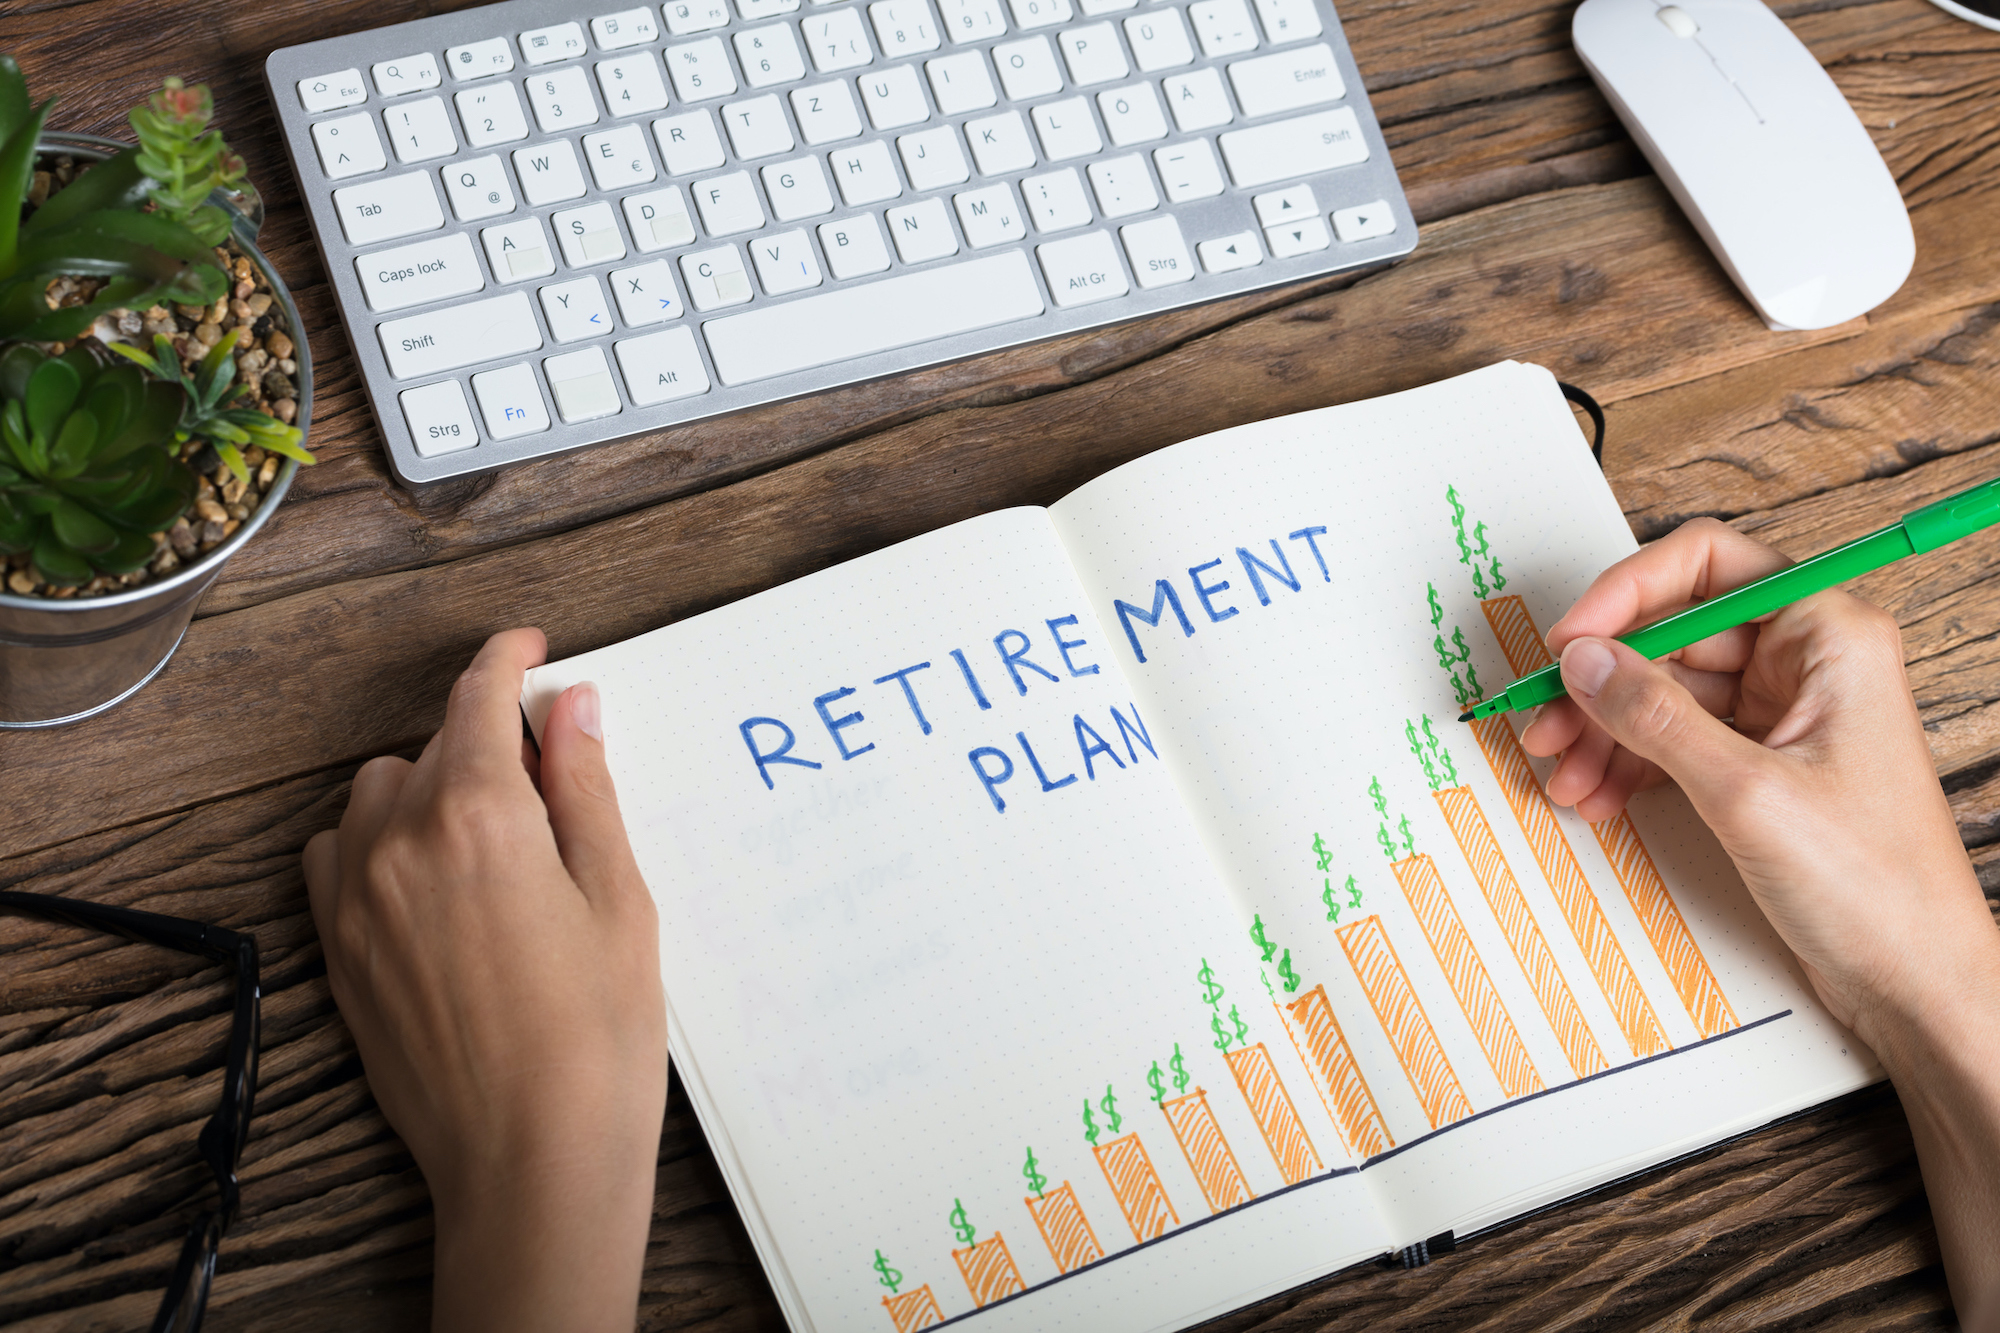 Top 6 Retirement Planning Tips For Your Mid-60s and Beyond